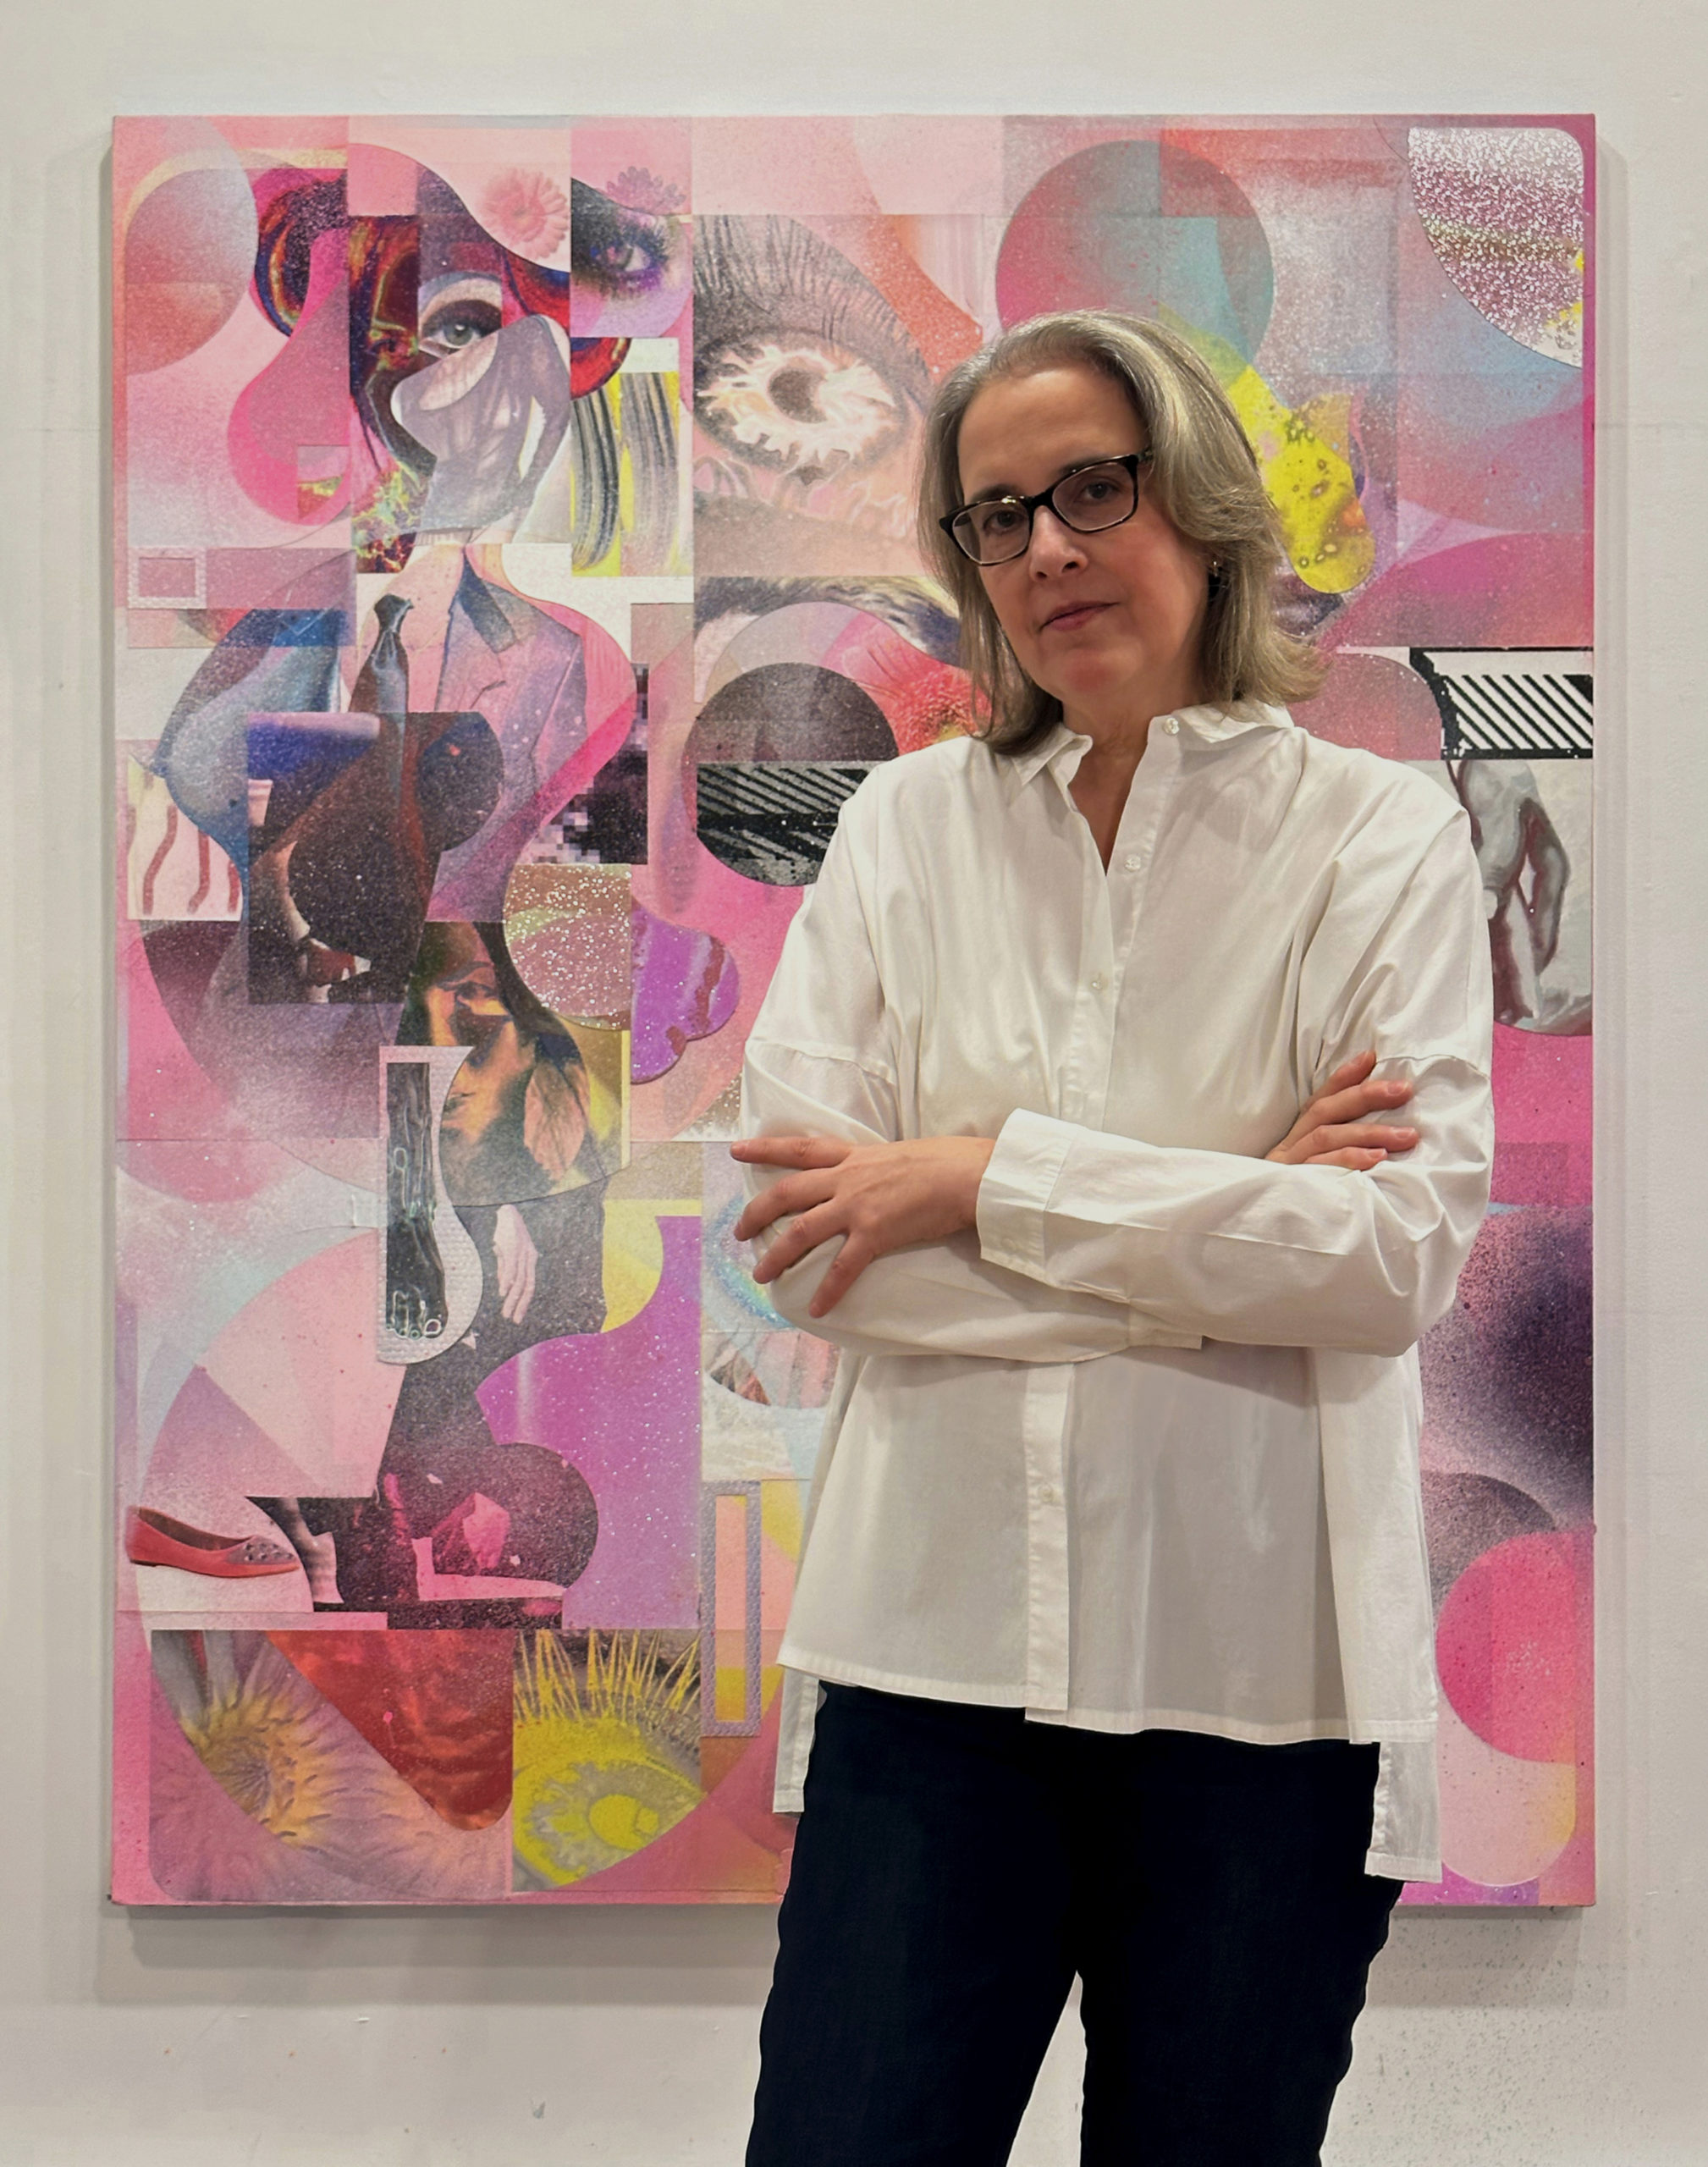 A picture of a woman in a white shirt standing in front of an abstract painting.